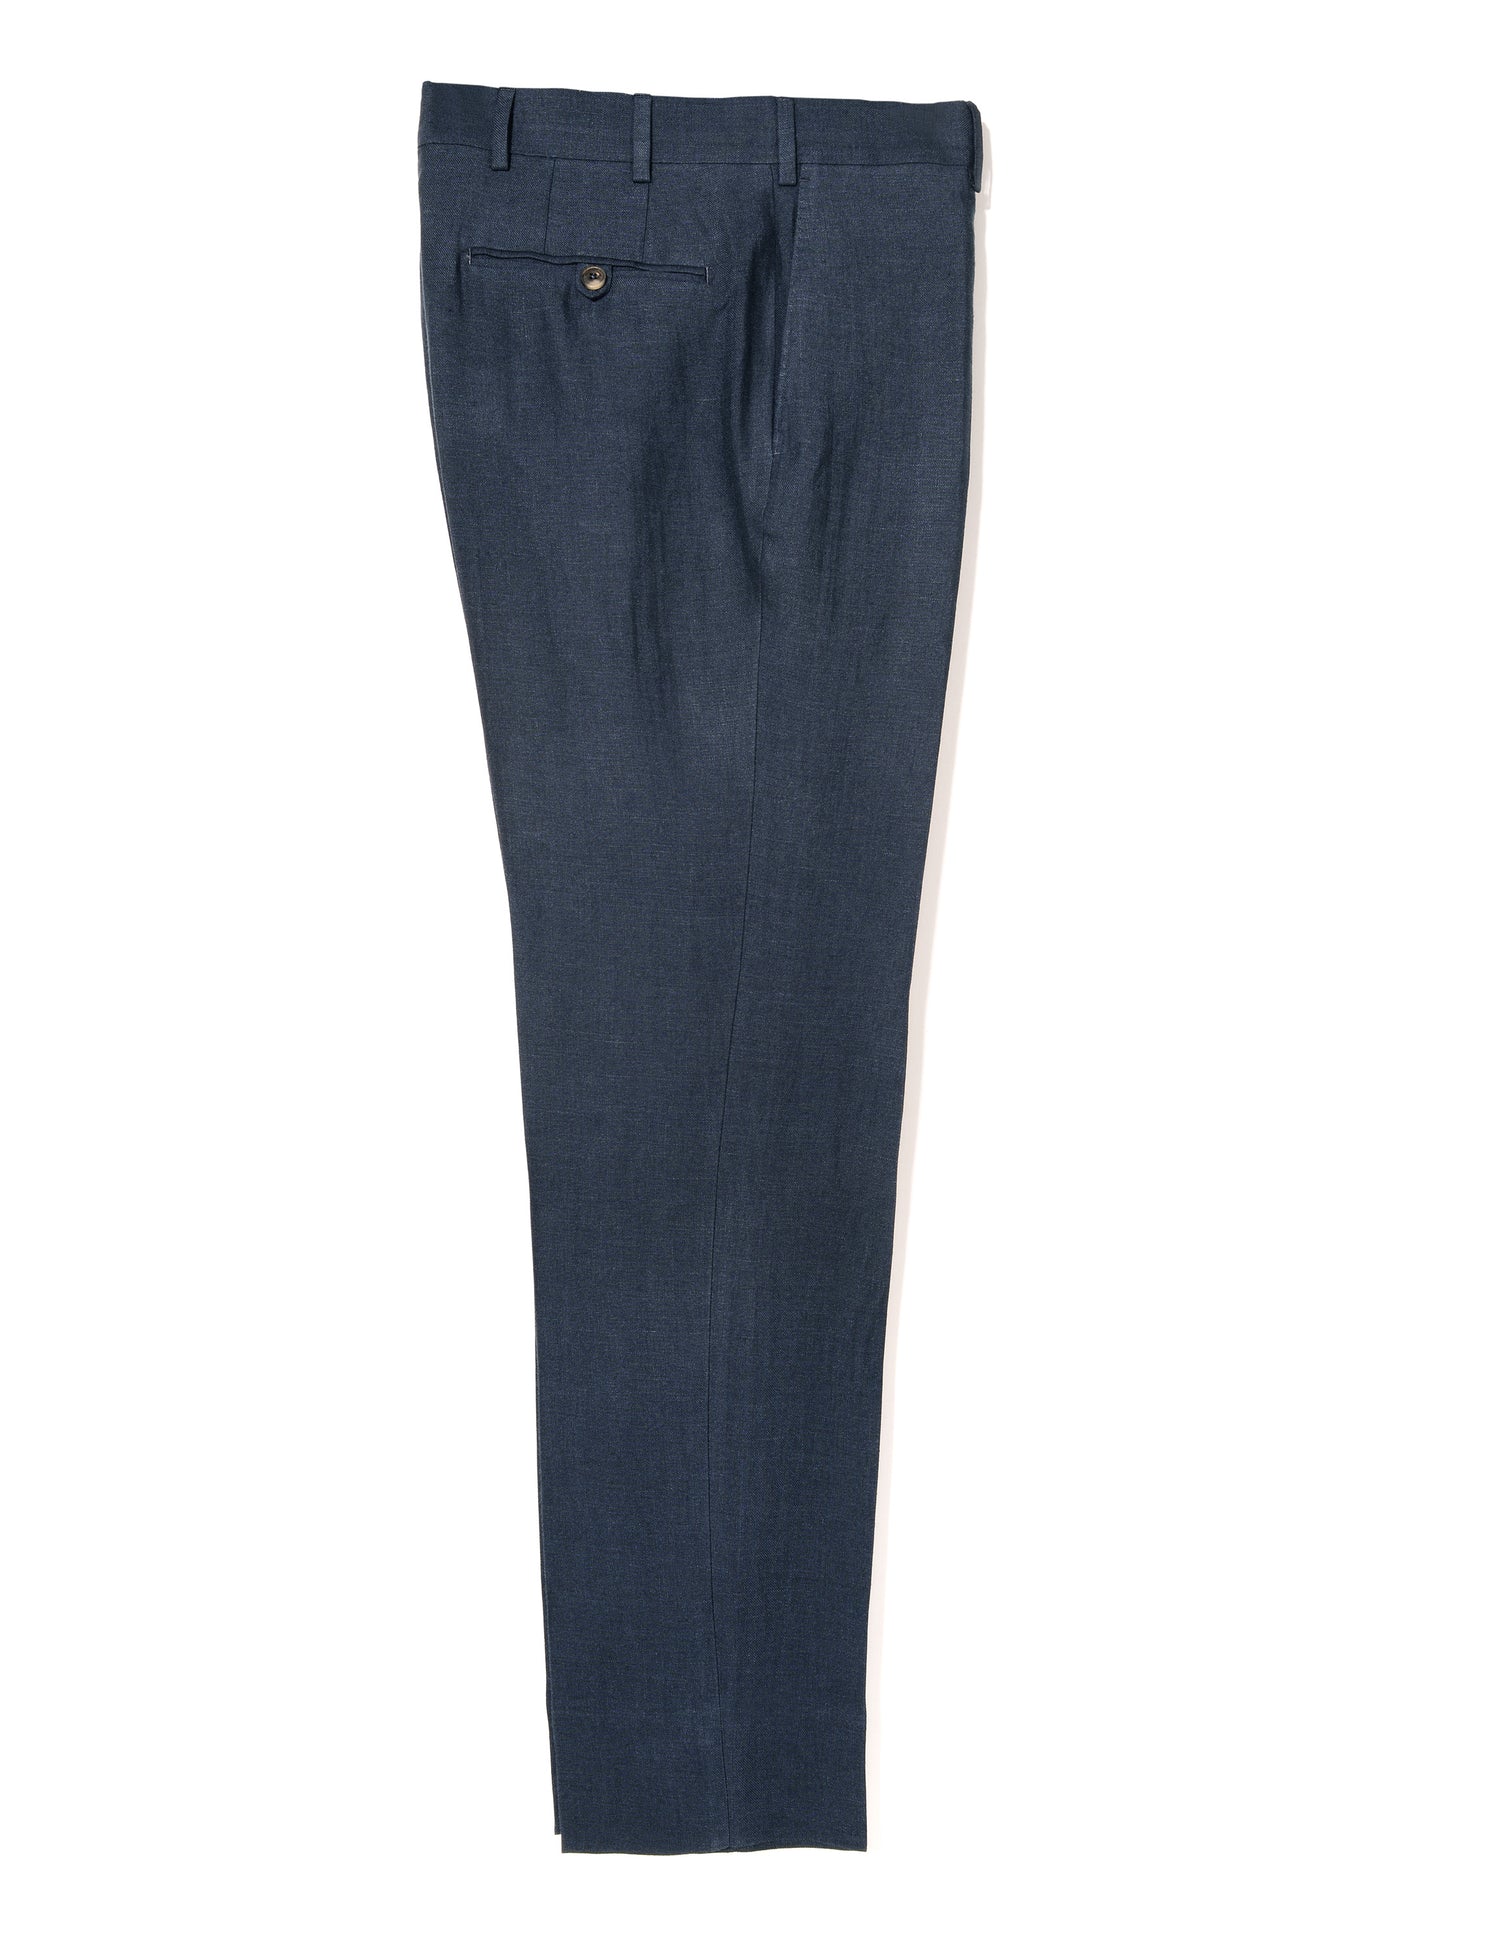 Brooklyn Tailors BKT50 Tailored Trousers in Linen Twill - Salerno Blue full length flat shot